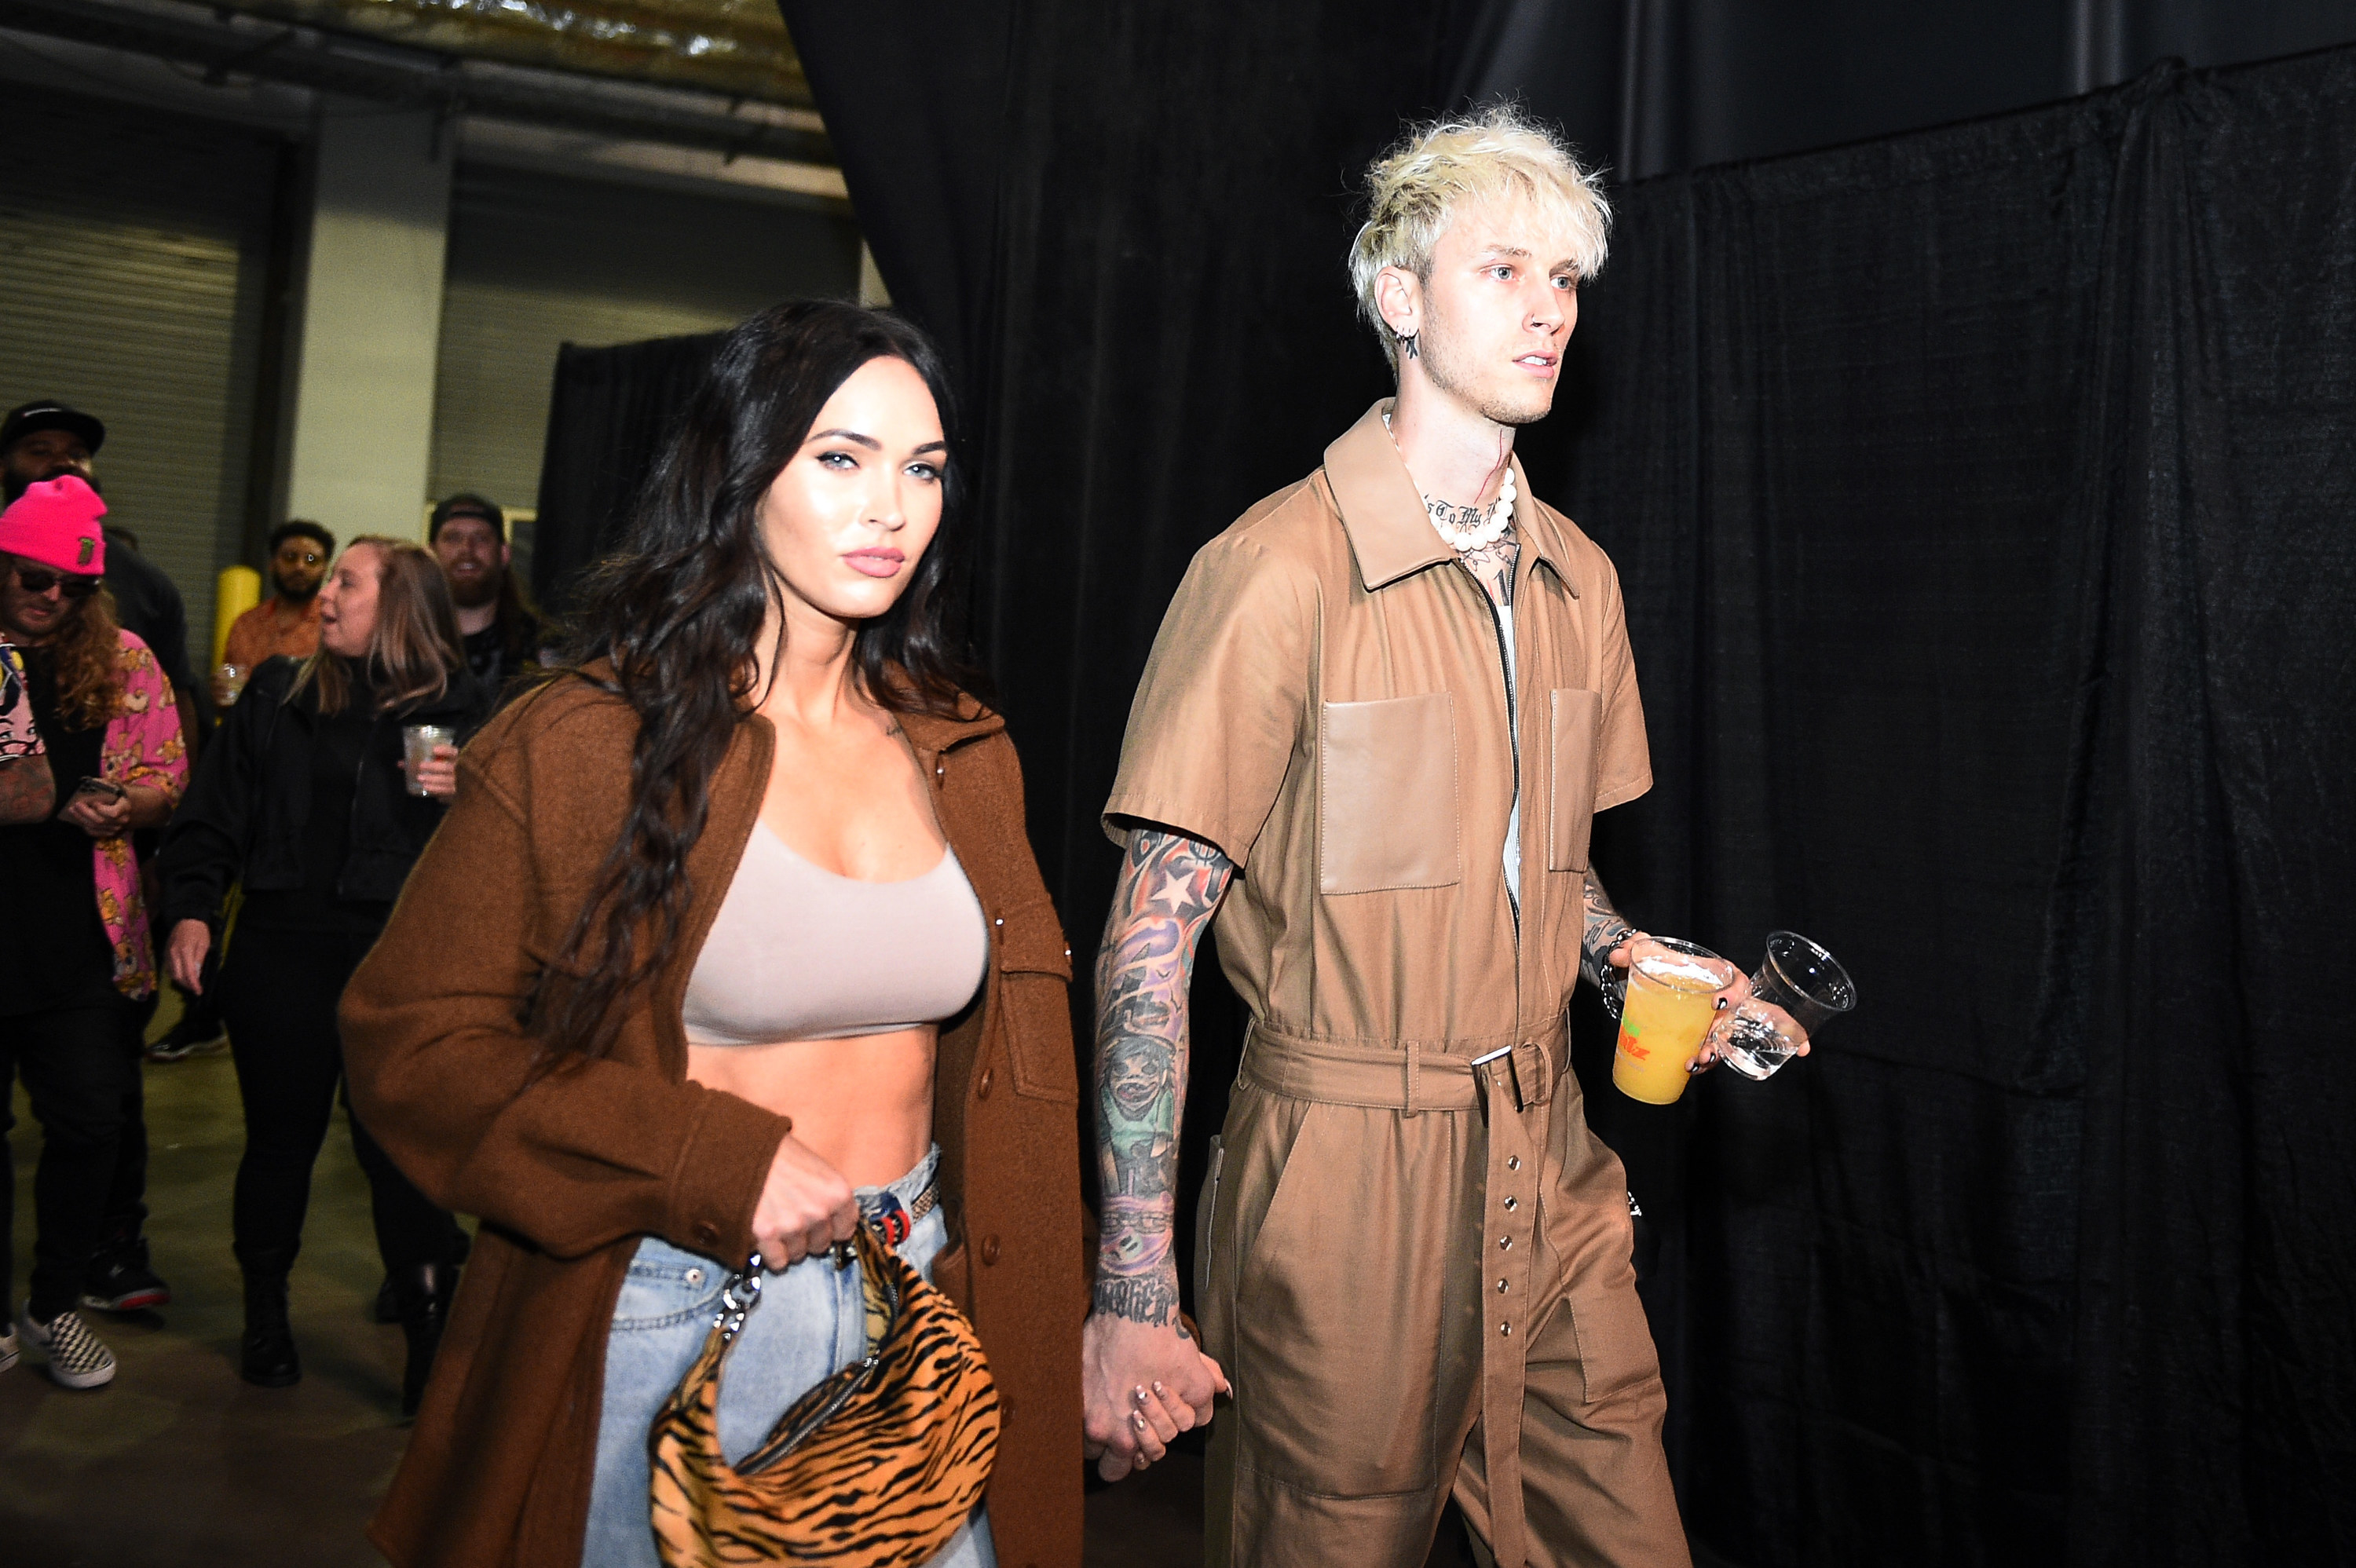 Megan and MGK walk backstage at an event holding hands